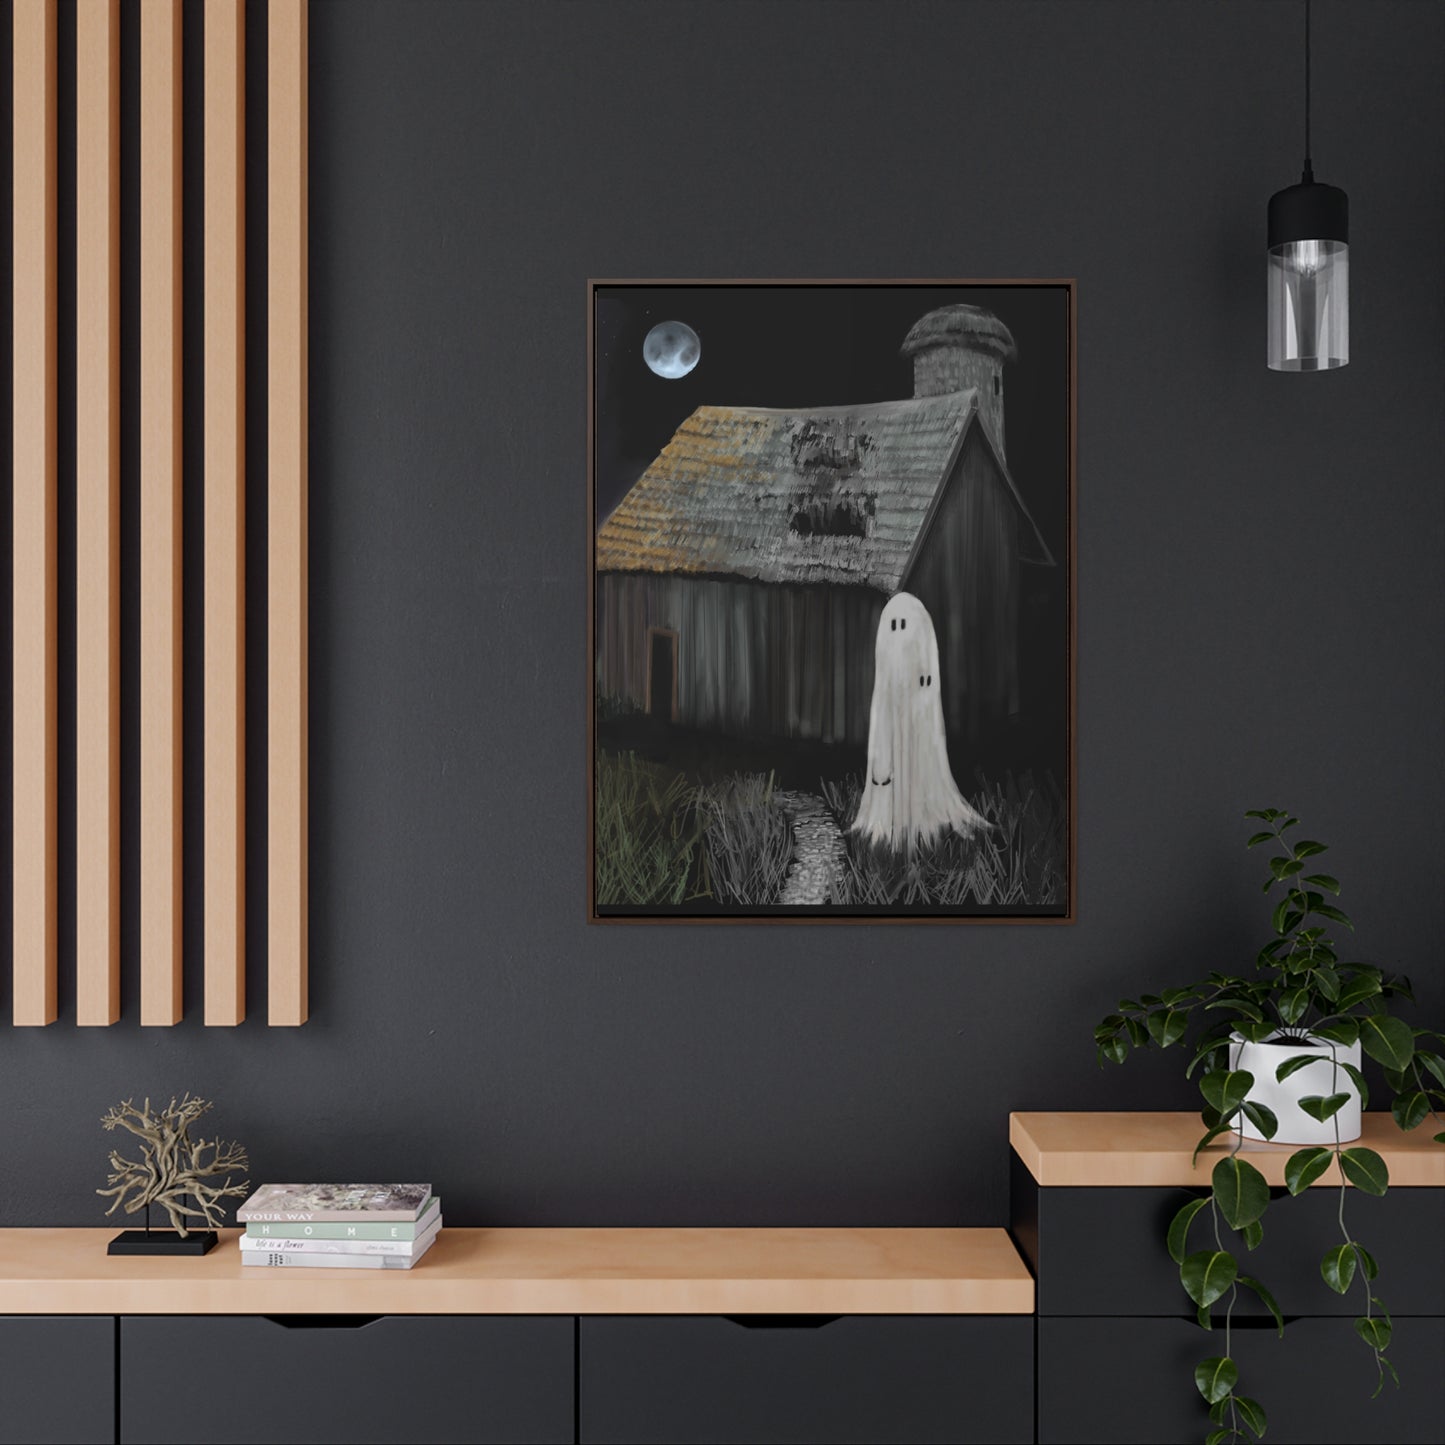 Haunted Barn Gallery Canvas Wrap, Vertical Frame